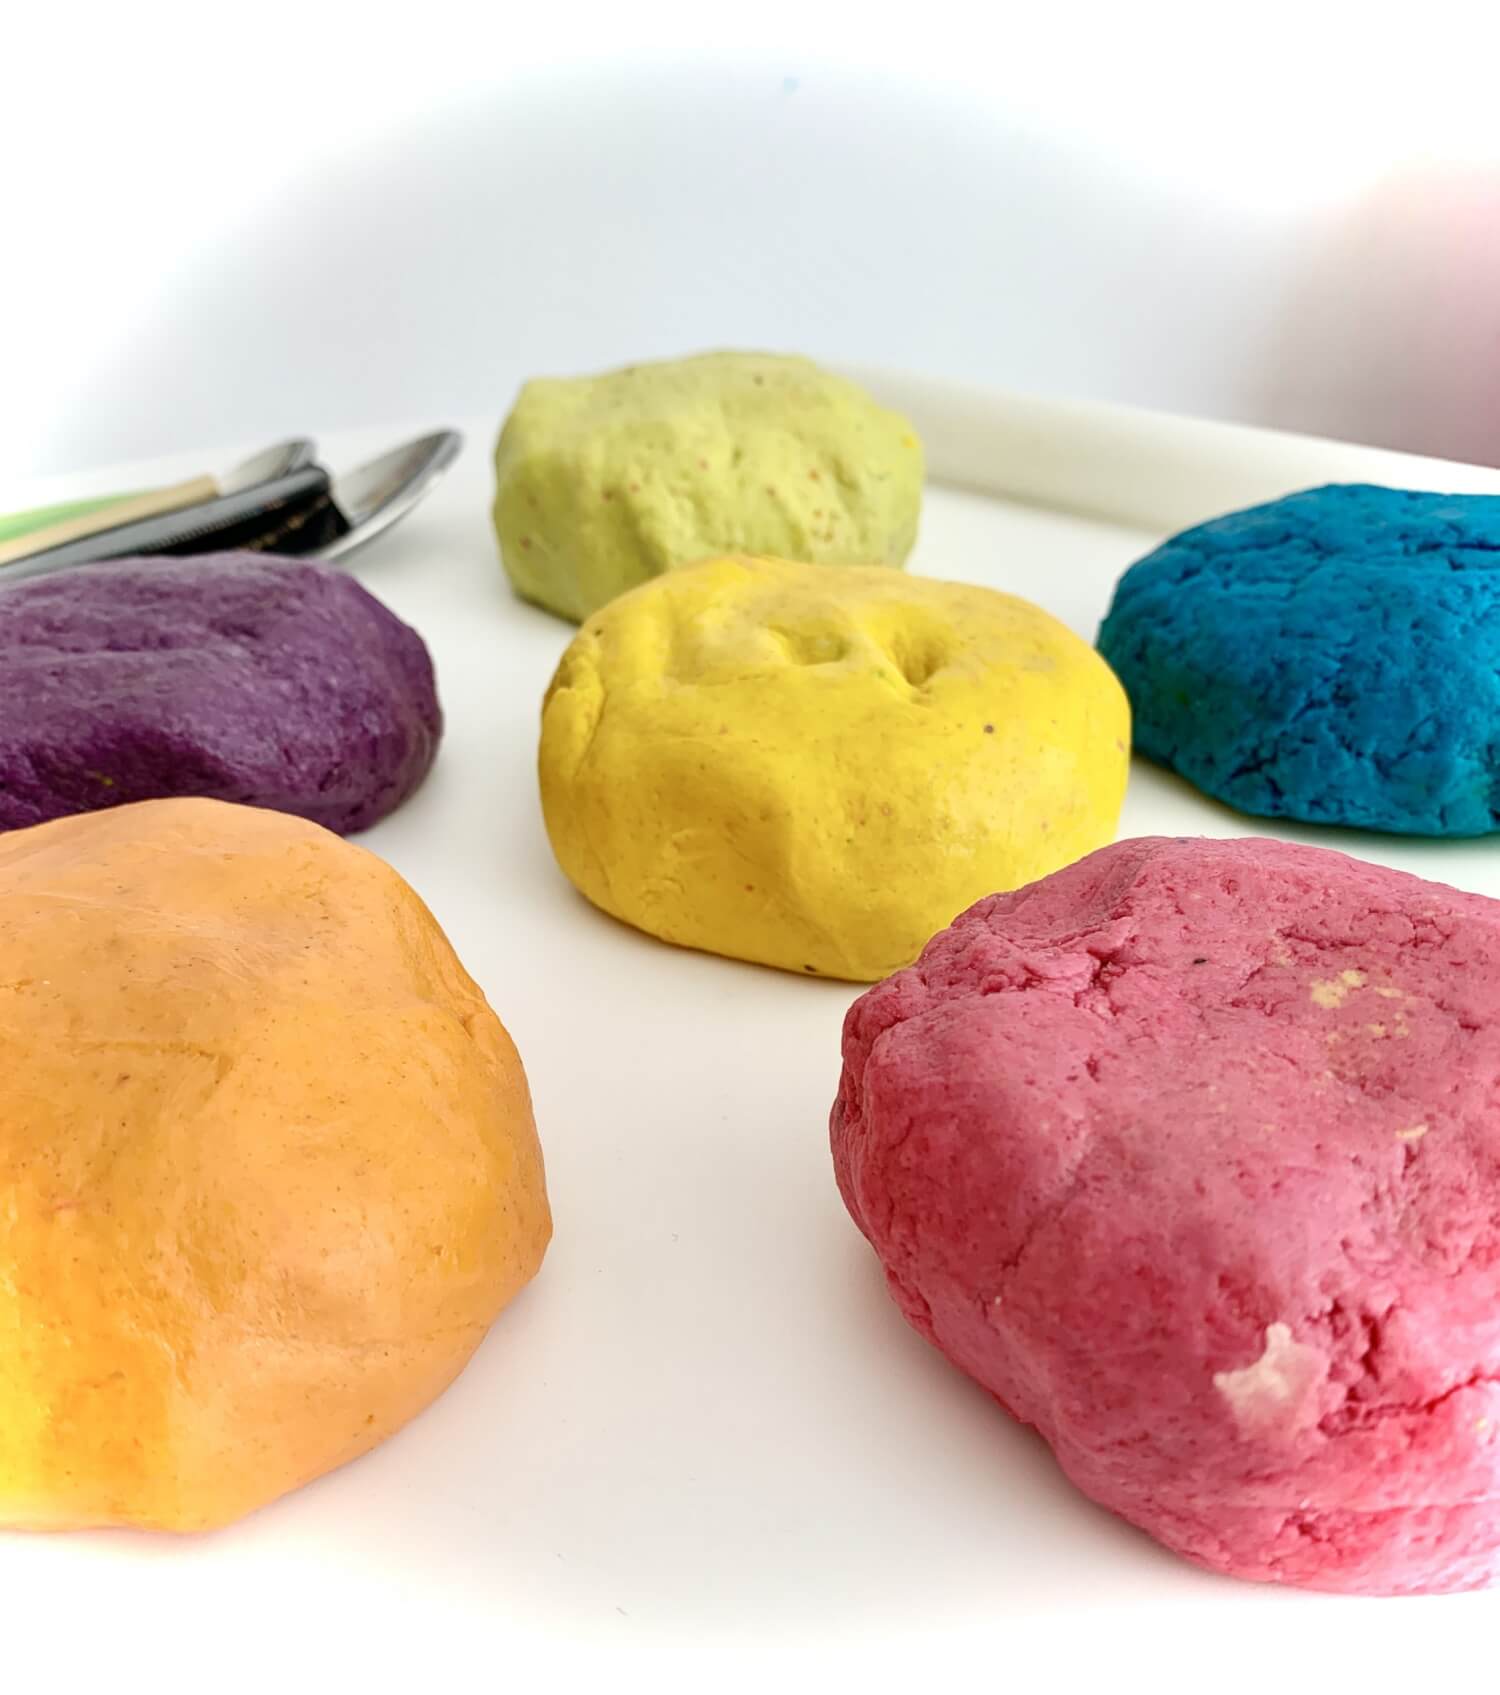 Easy No-Bake Playdough Recipe Your Students Will Love - The